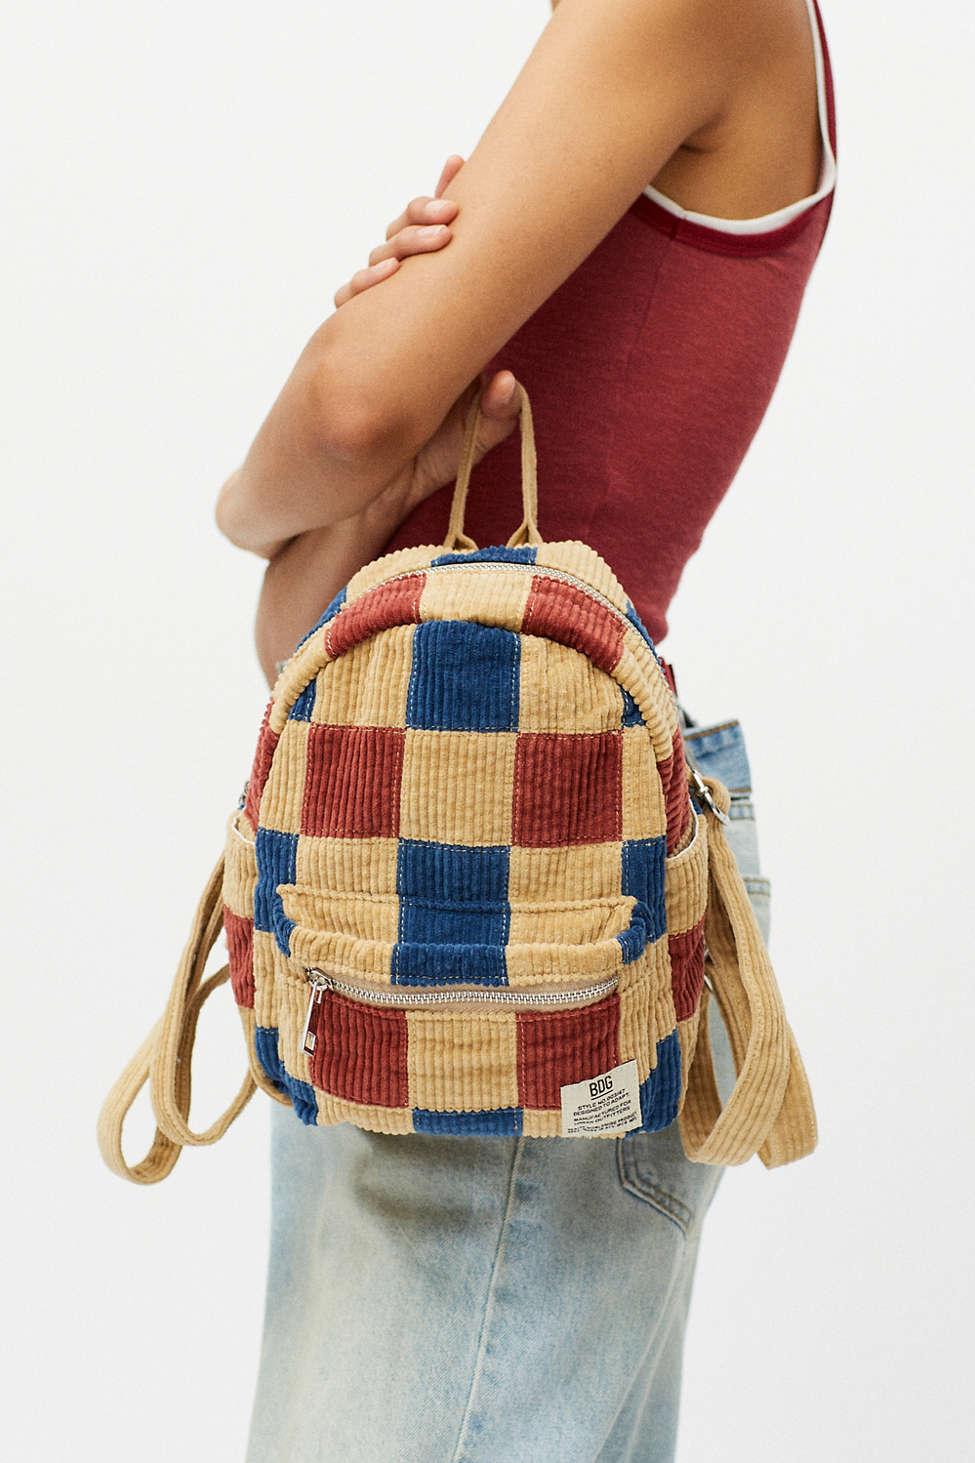 Patchwork Corduroy Backpack Urban Outfitters Women Accessories Bags Rucksacks 